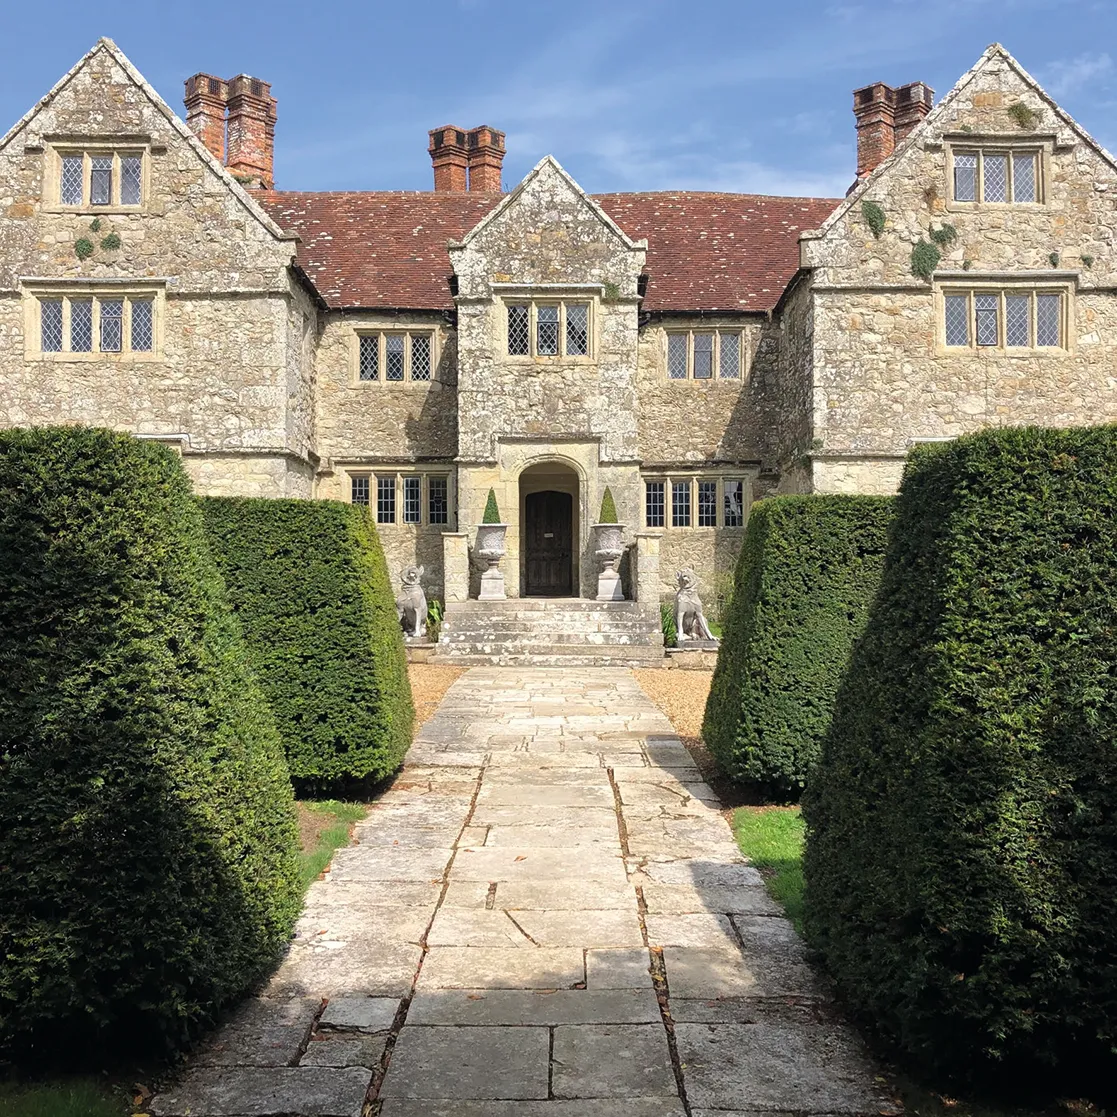 Arreton Manor is a wonderful place to stay for anyone interested in surrounding themselves with history.